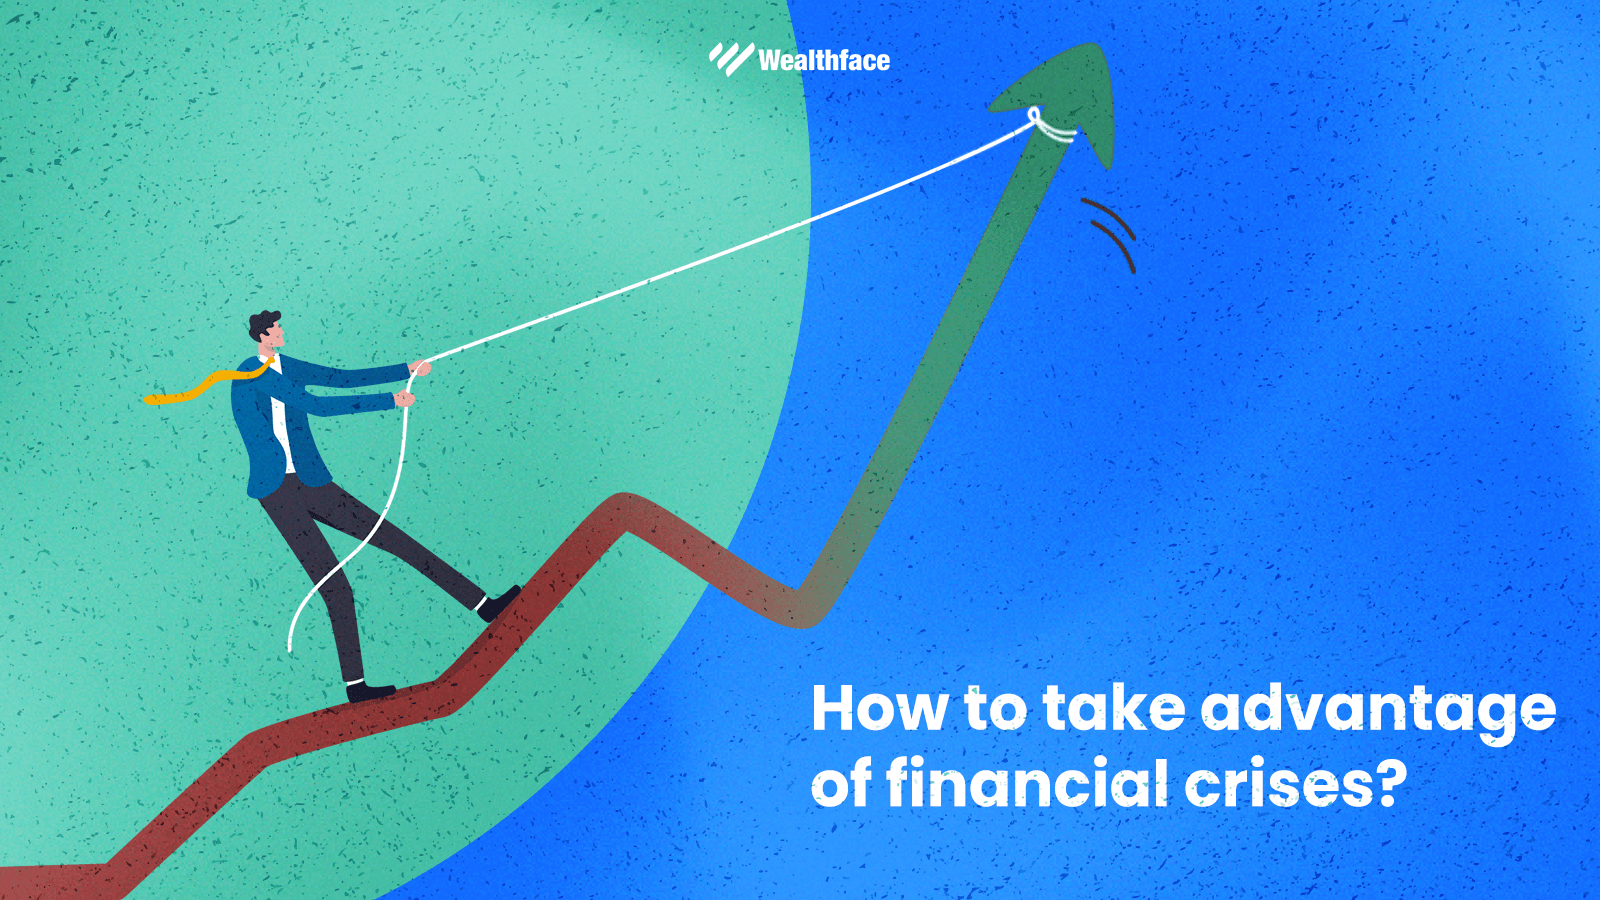 How to take advantage of financial crises?